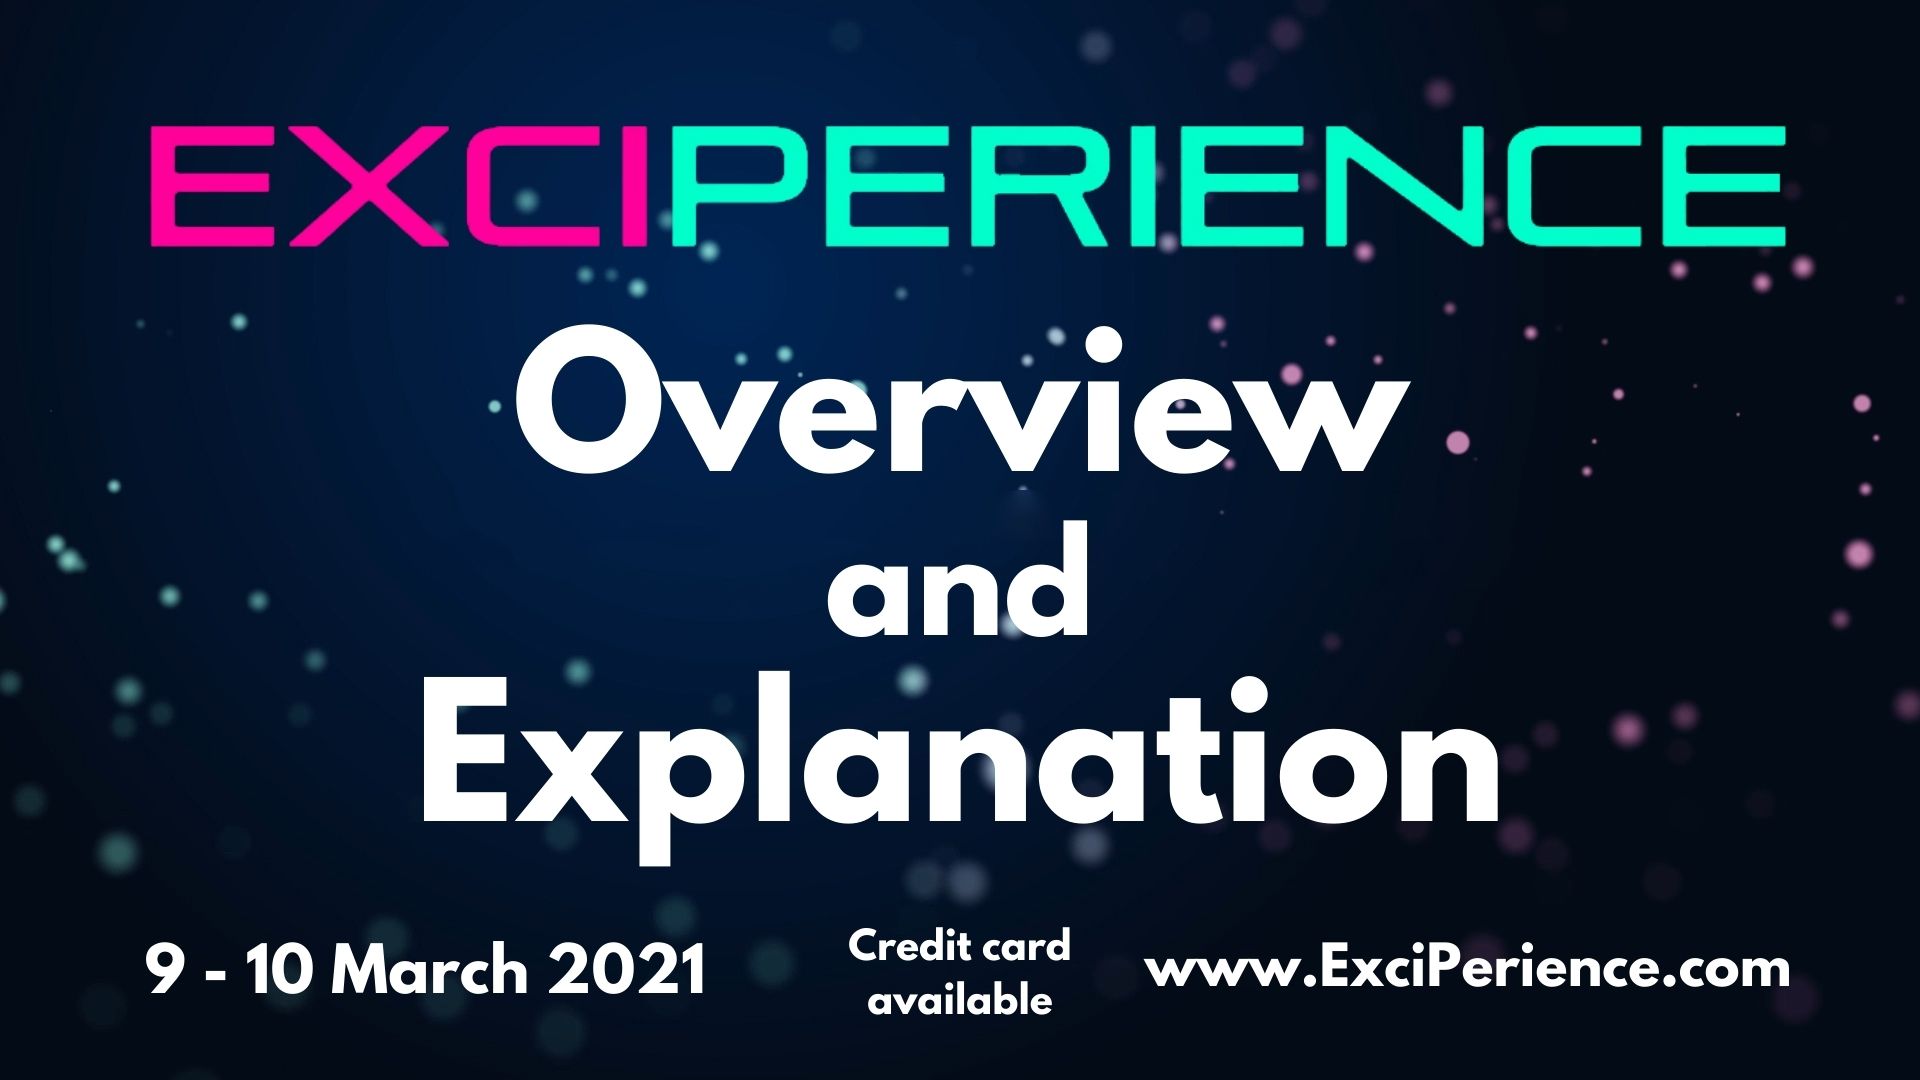 ExciPerience - The complete overview and explanation